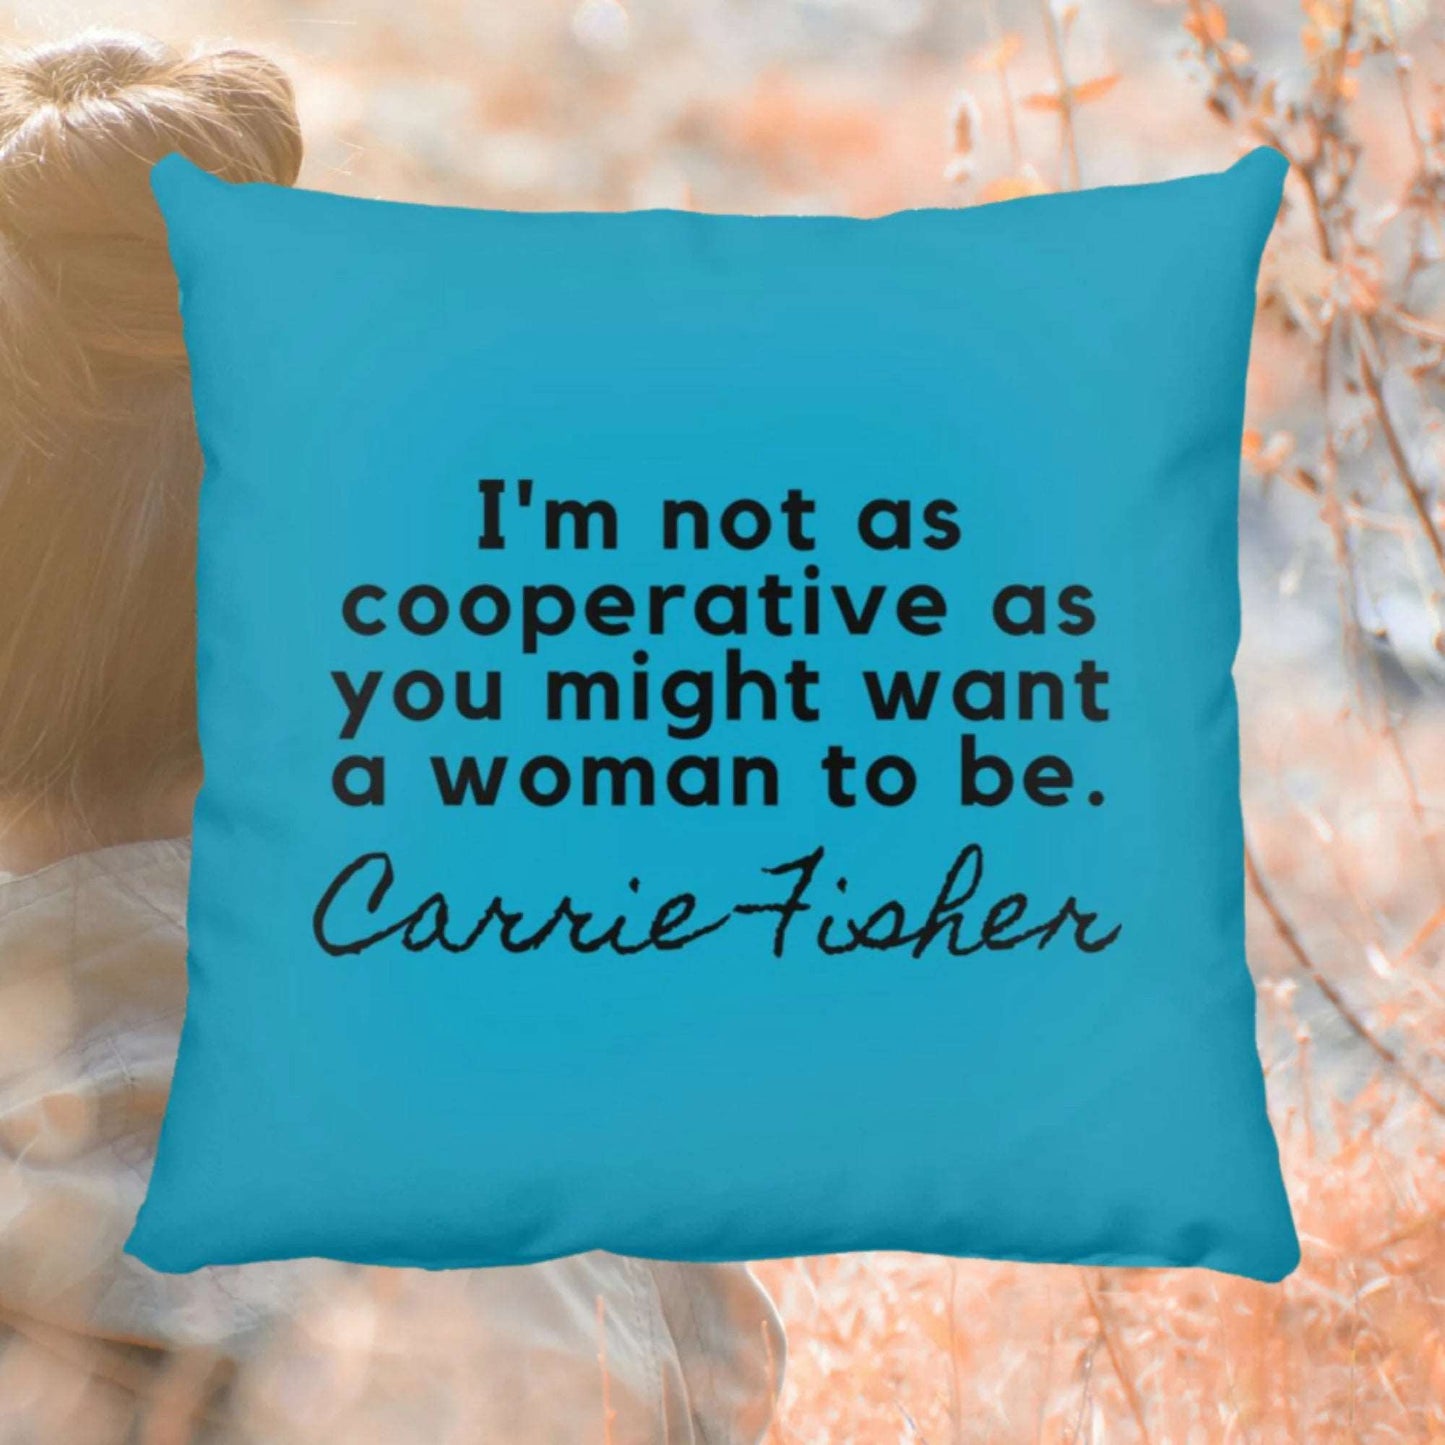 Carrie Fisher Quote Throw Pillow